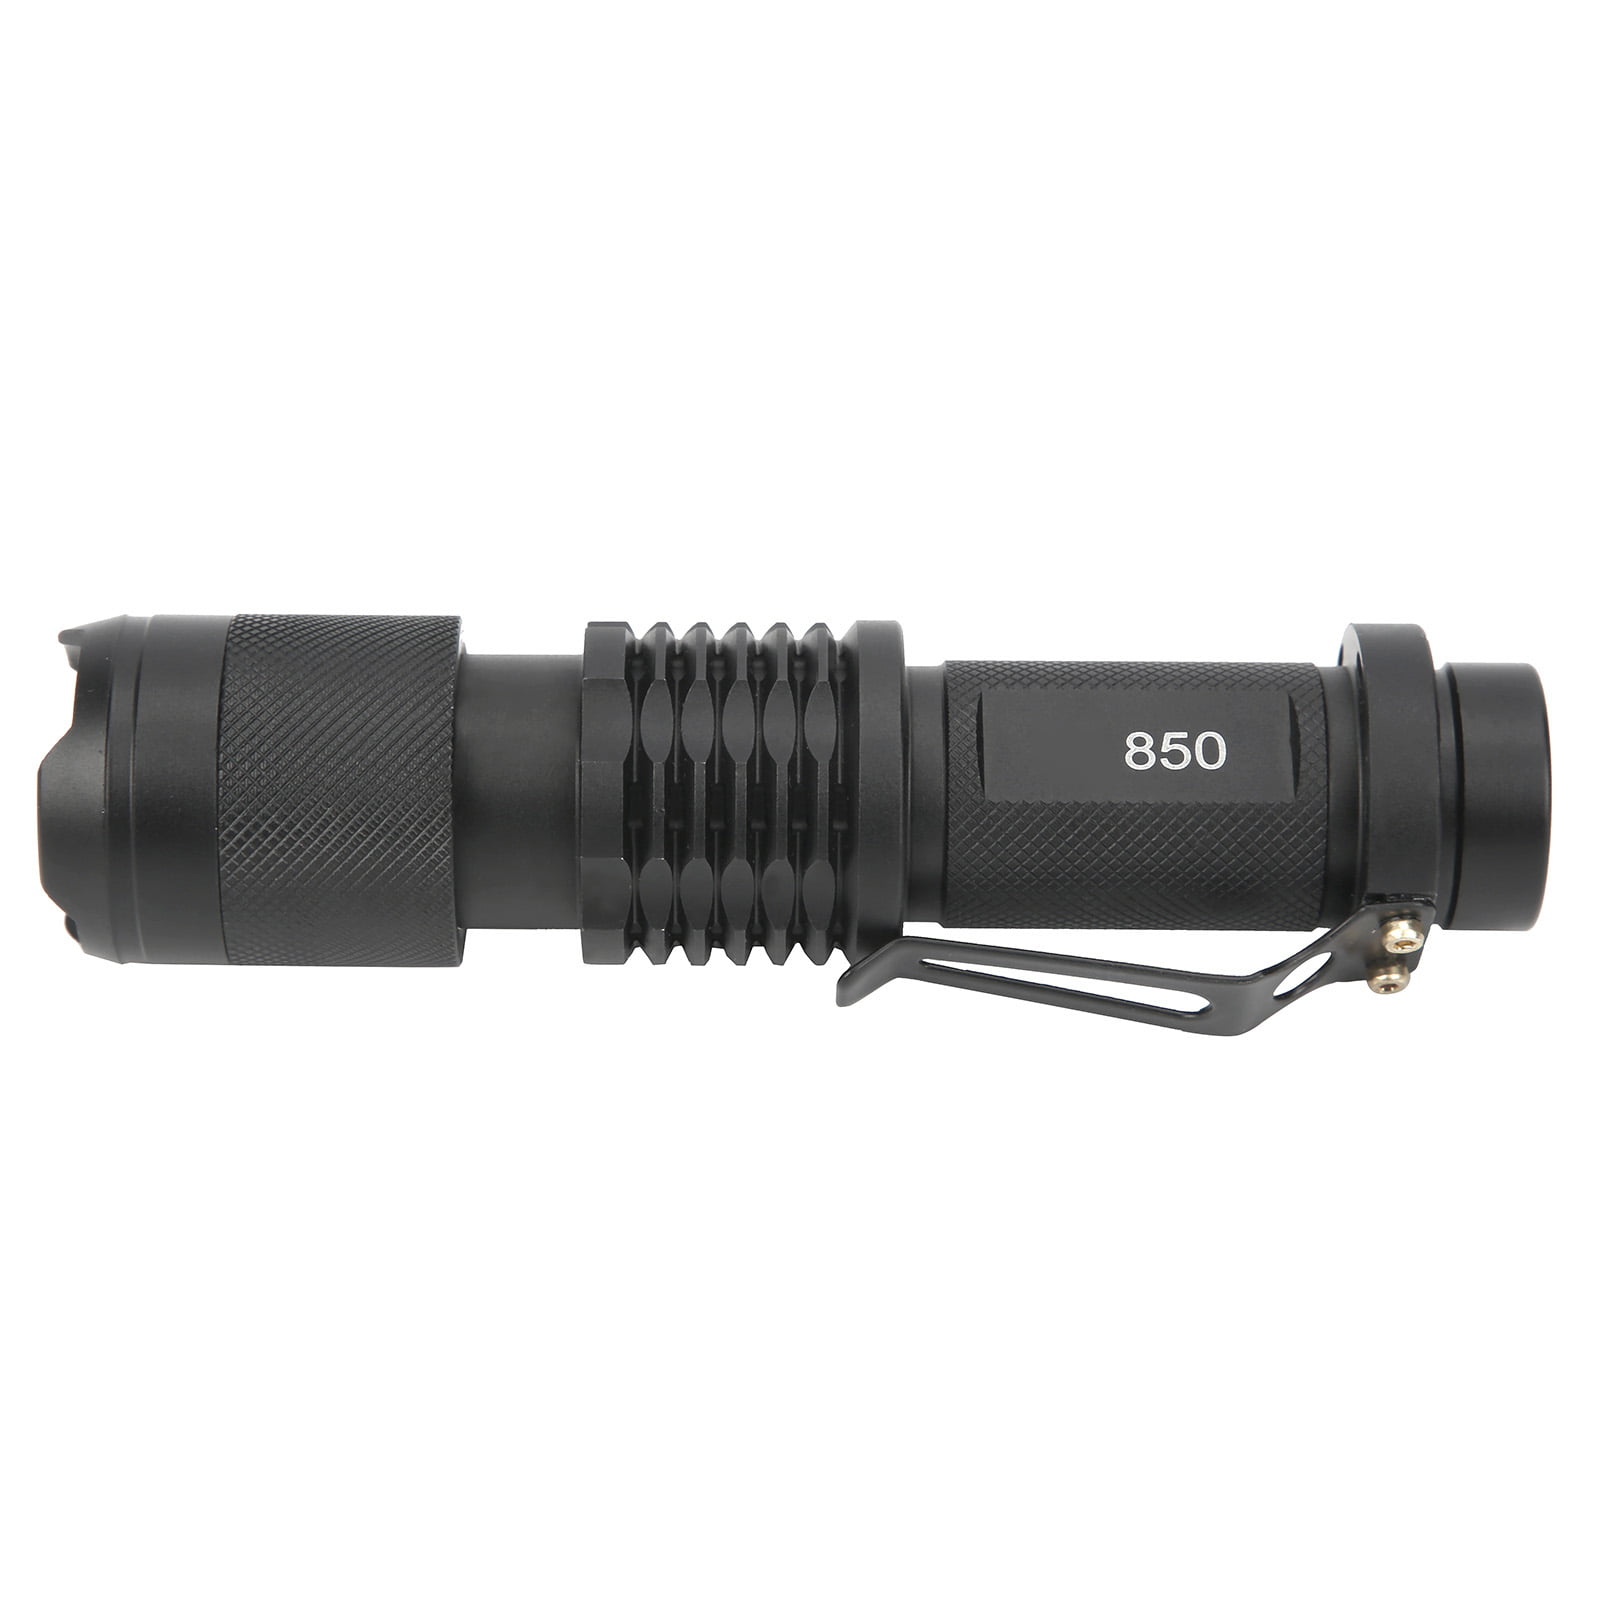 Zoomable Infrared Light Hunting Torch Black 850nm IR Night Vision illuminator 